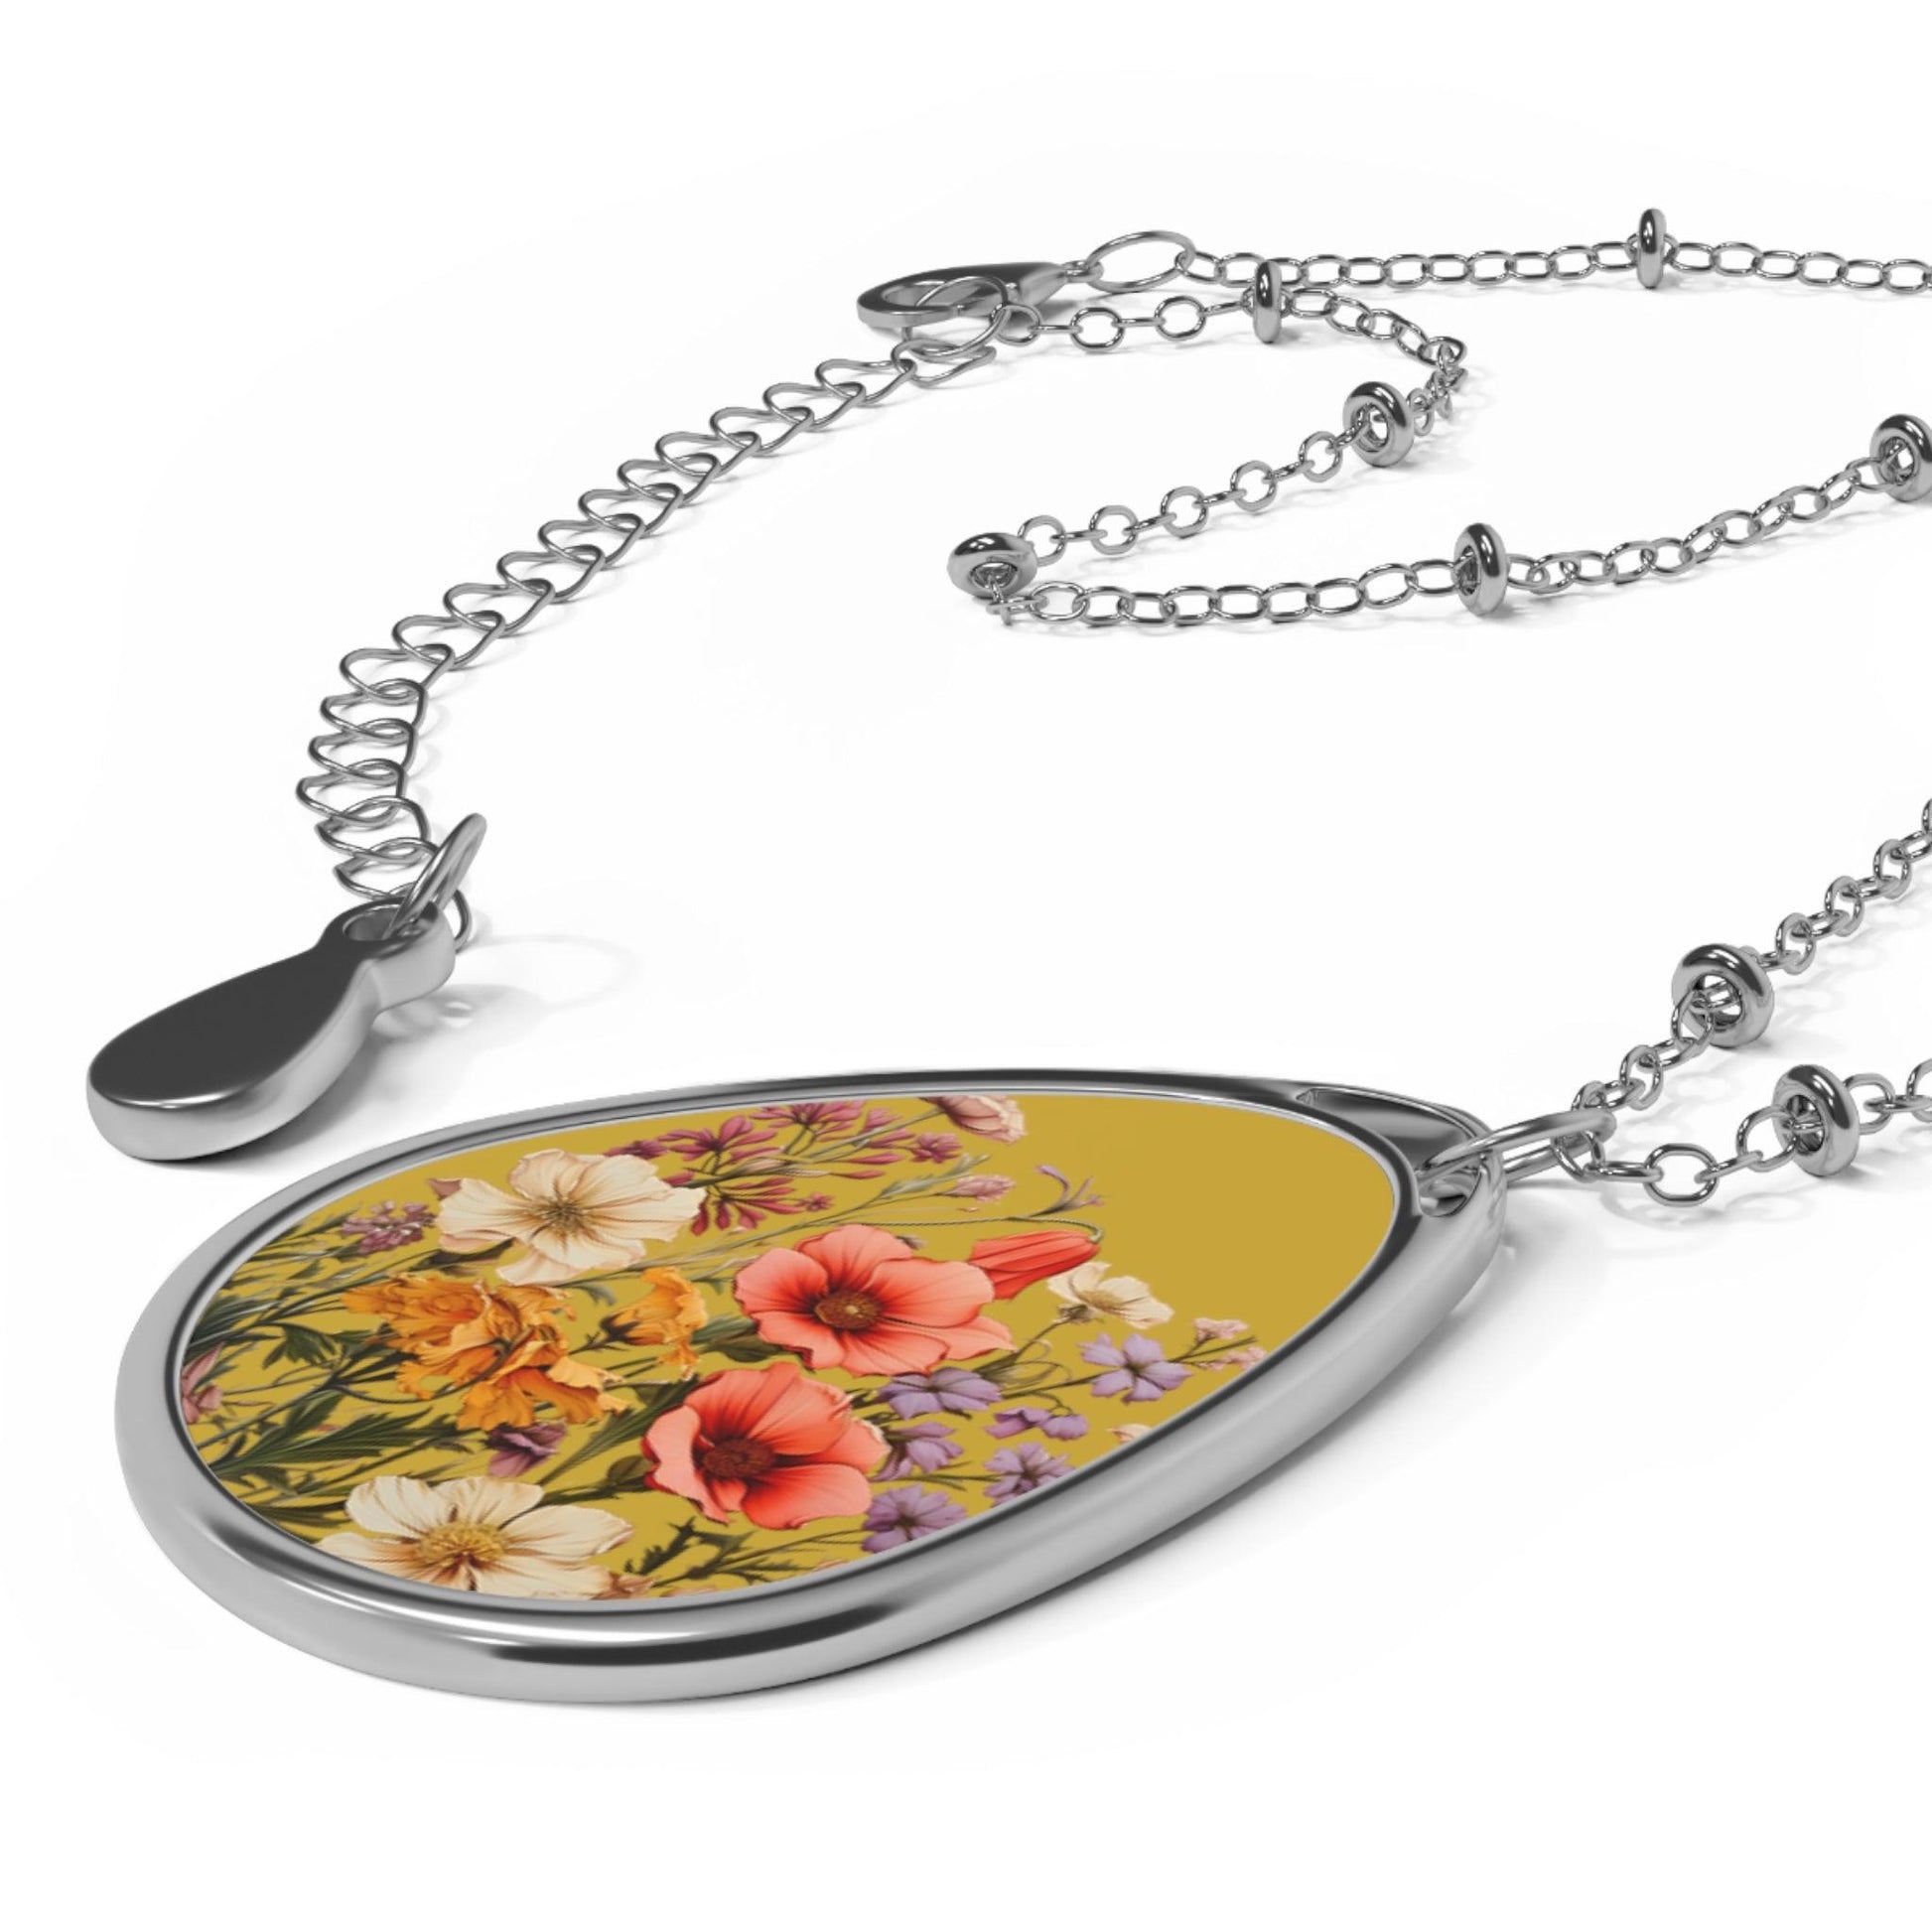 Flower Oval Necklace Flower Necklace - Unique Gift For Her Birthday Christmas Flower Necklace Flower Jewelry Nature Jewelry Floral Jewelry - Giftsmojo